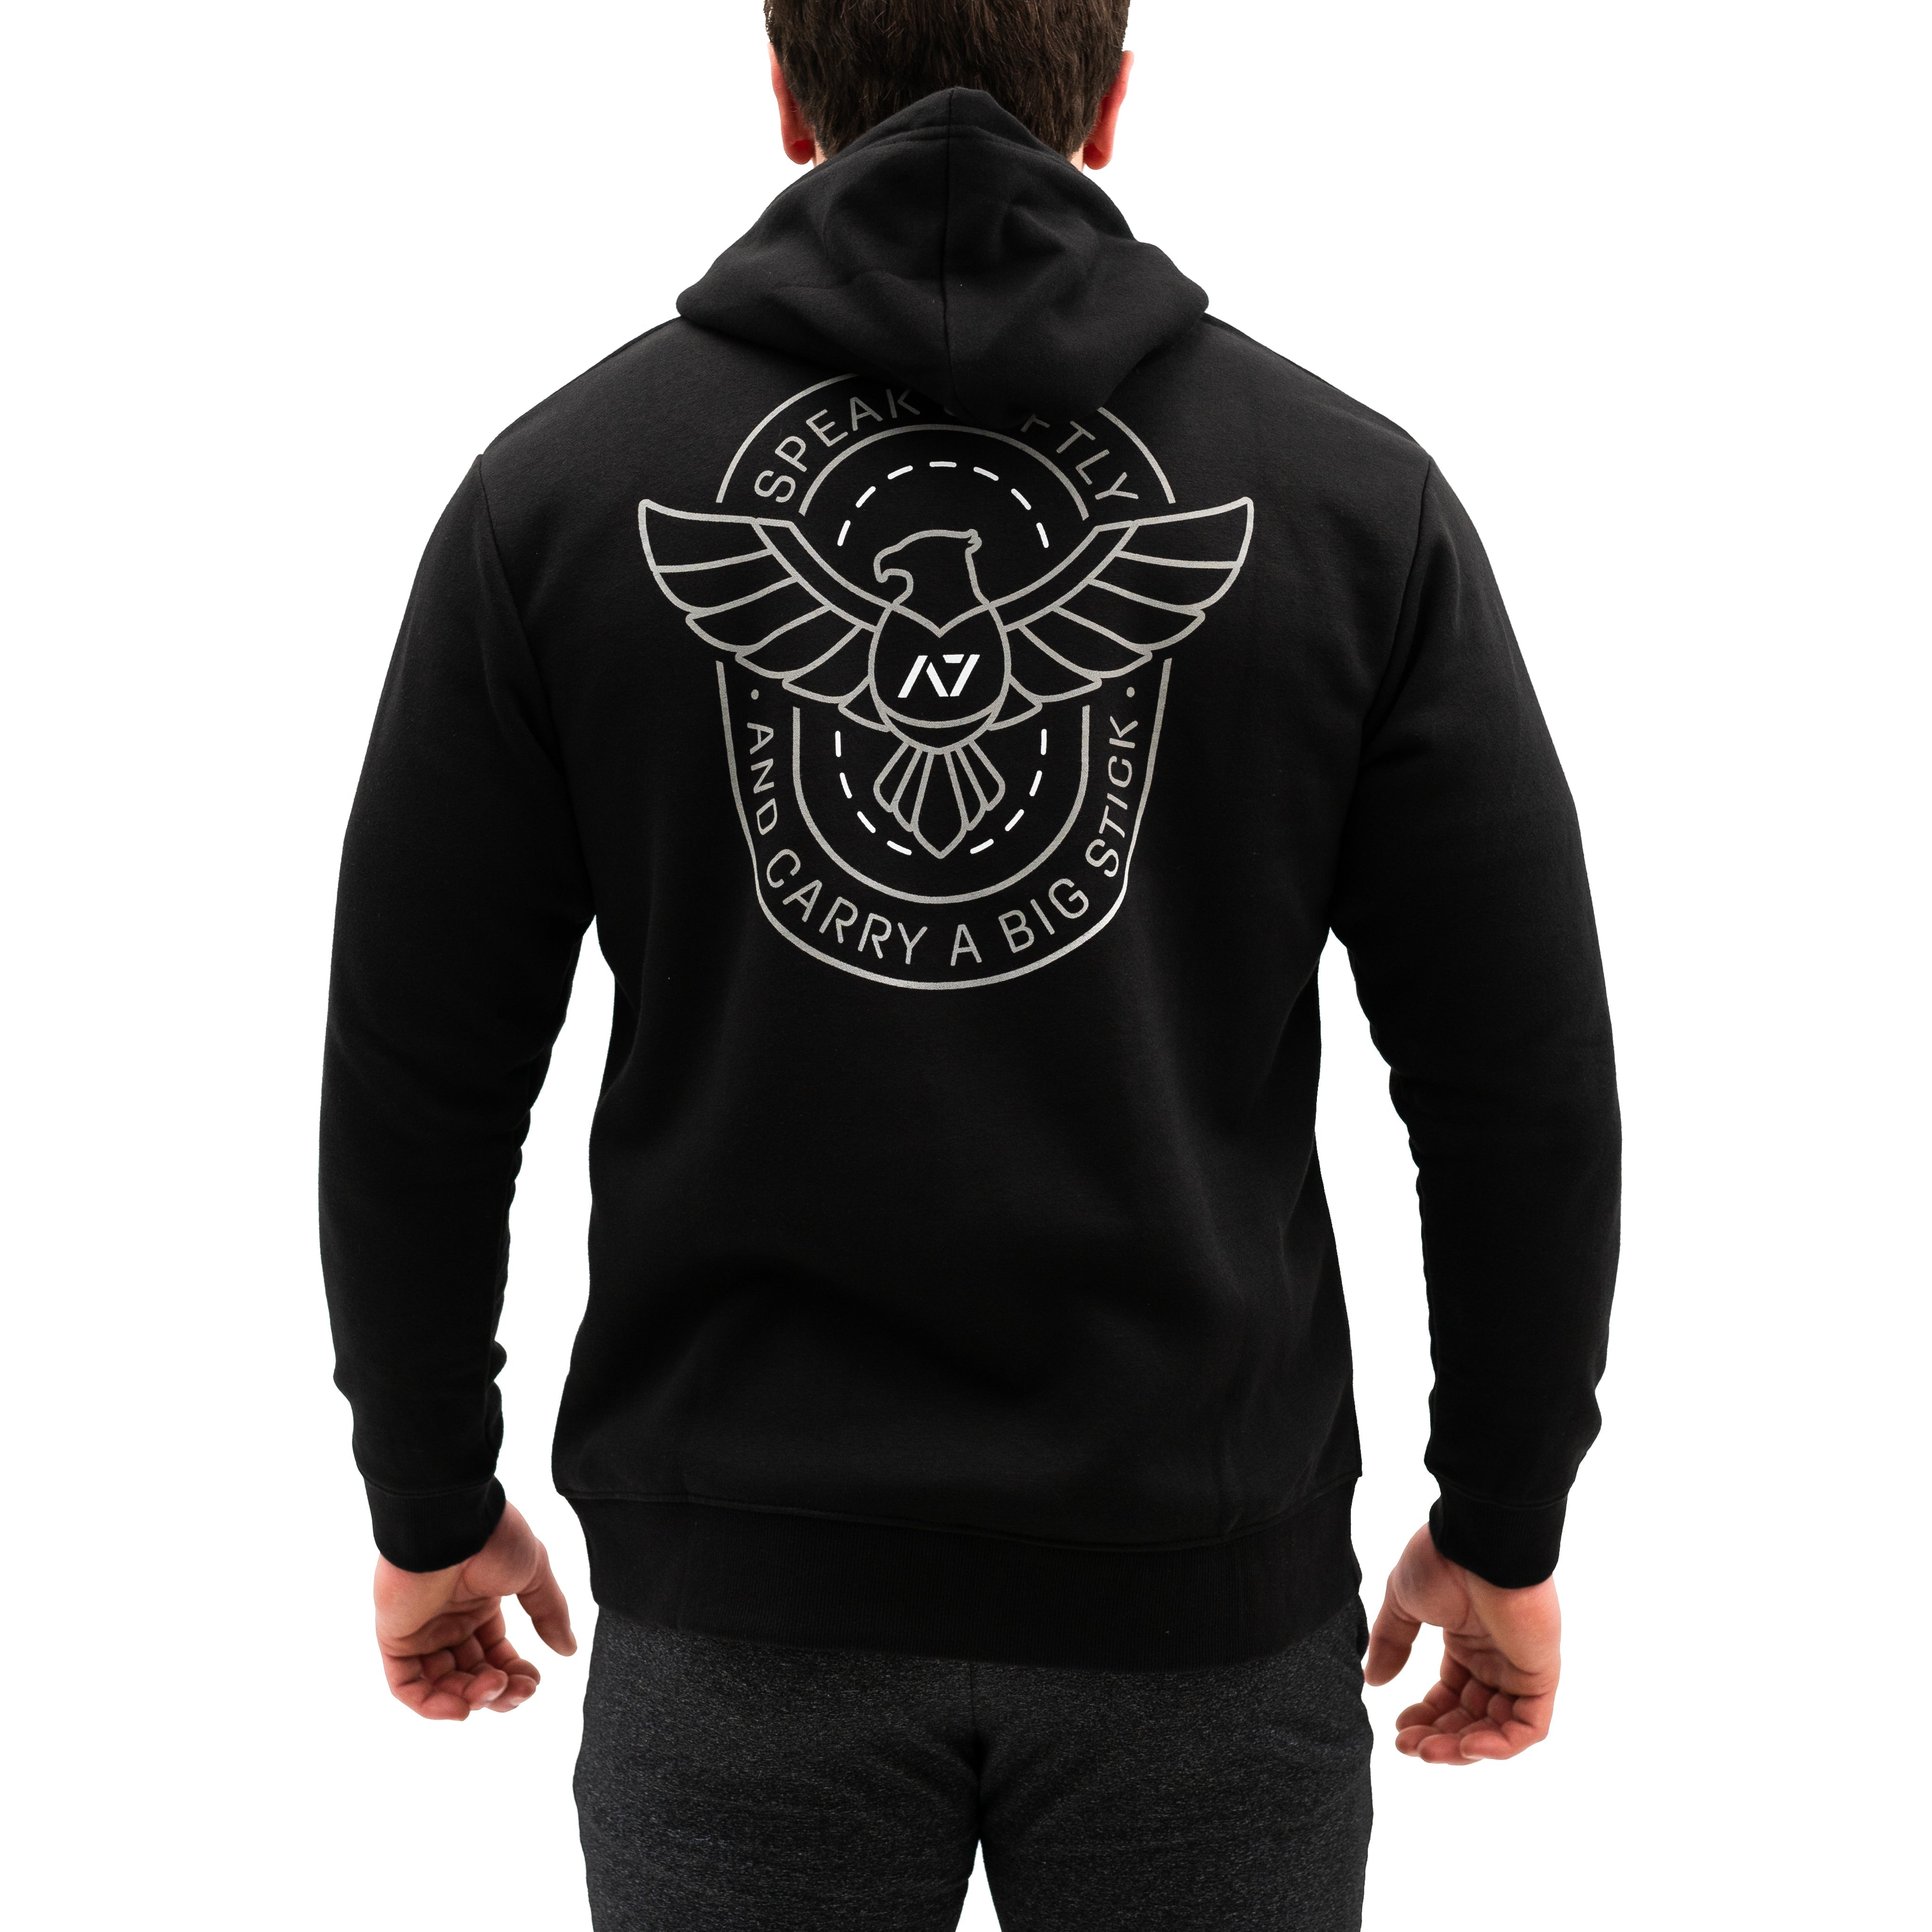 Go Far is a zip up hoodie great for casual wear or lifting in the gym. Purchase Go Far zip up hoodie in UK and Europe from A7 UK. A7 have the best Bar Grip Tshirts, shipping to UK and Europe from A7 UK. Go Far is our newest design on our zip up hoodie. Demand Greatness on the front with an eagle on the back, in a chromium colourway! A7UK supplies the best Powerlifting apparel for all your workouts. Available in UK and Europe including France, Italy, Germany, the Netherlands, Sweden and Poland.